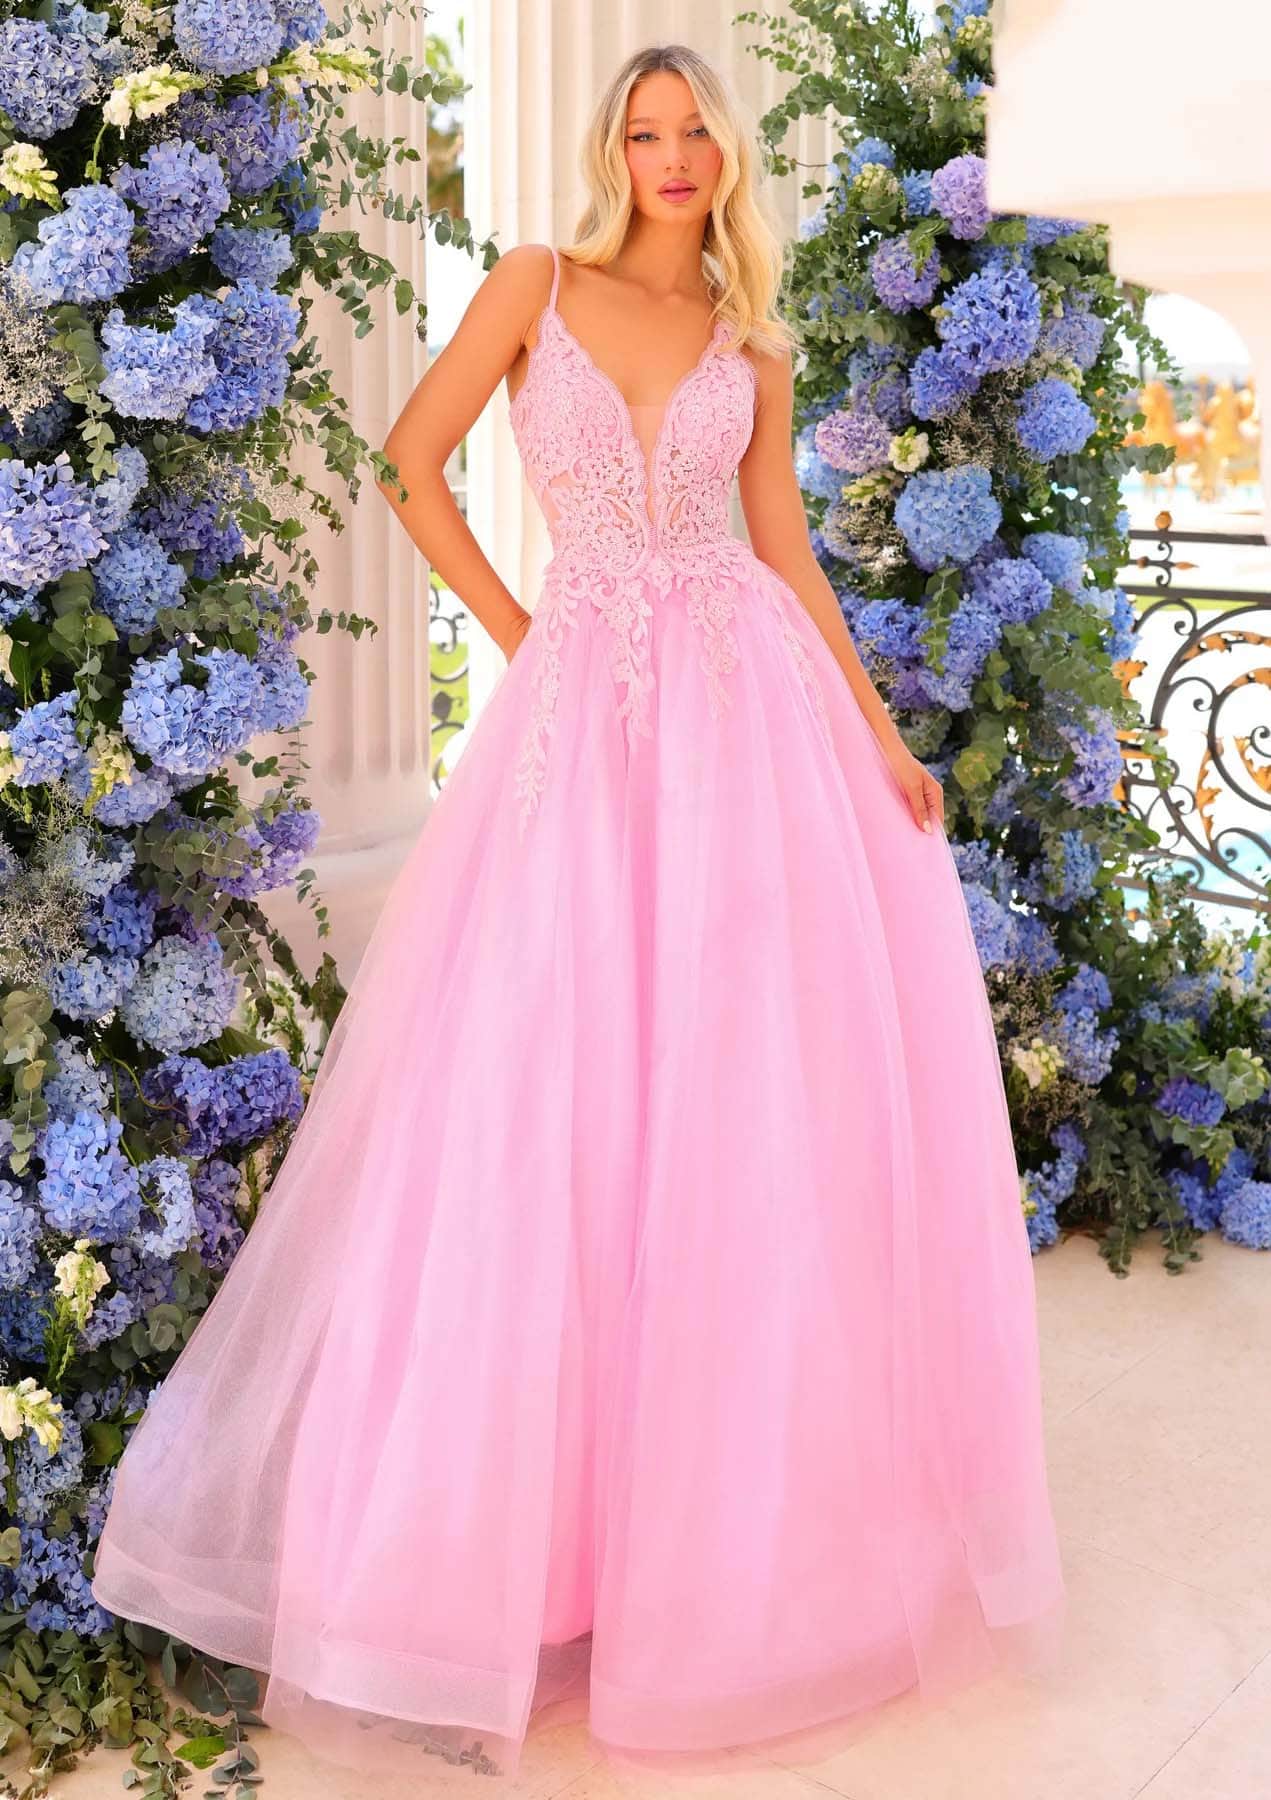 Clarisse 810784 - Lace Up A-Line Prom Gown Prom Dresses 00 / Baby Pink